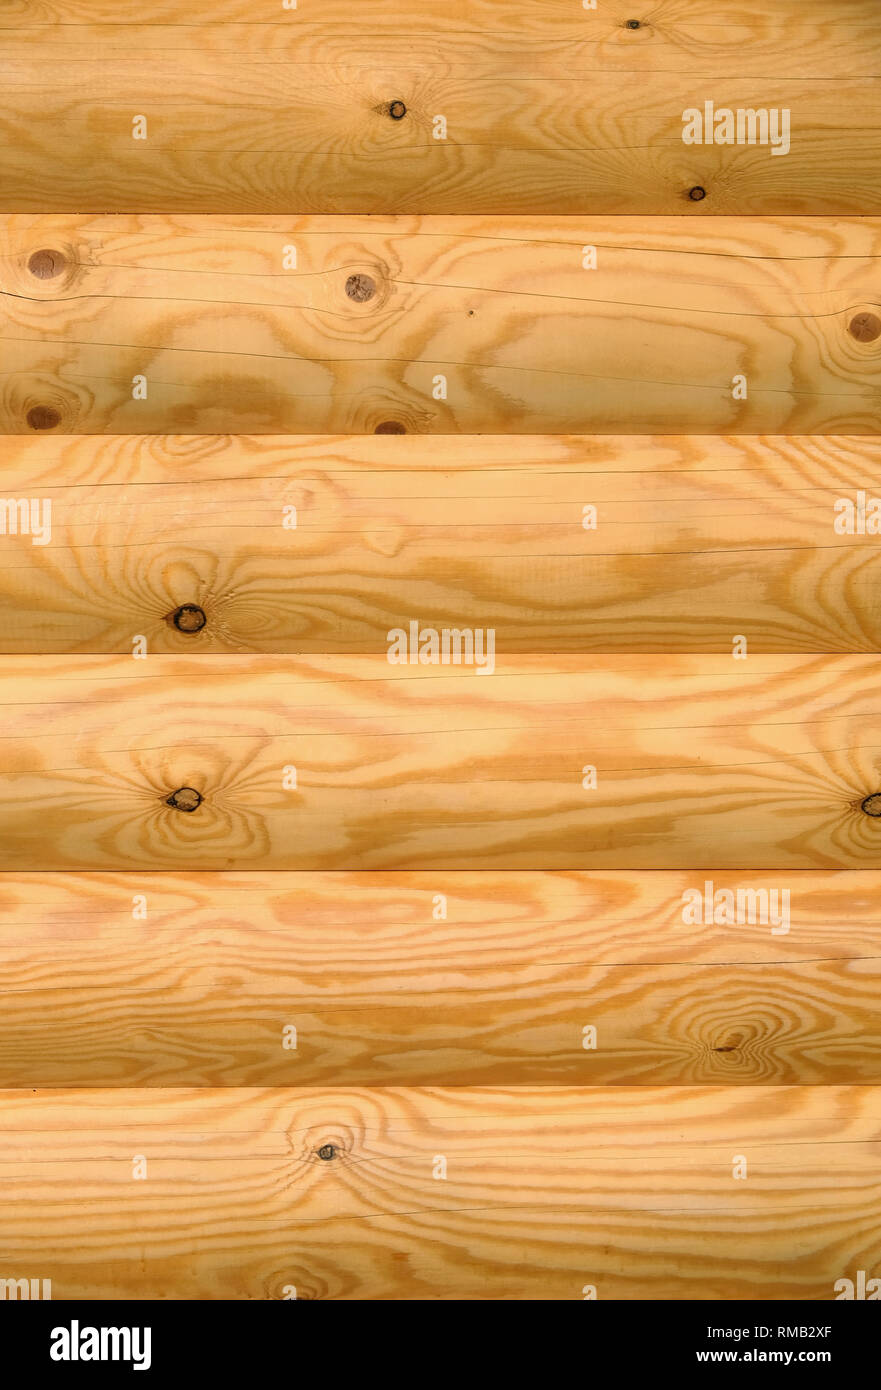 Background of horizontal hewed smooth painted wooden logs close up vertical view Stock Photo